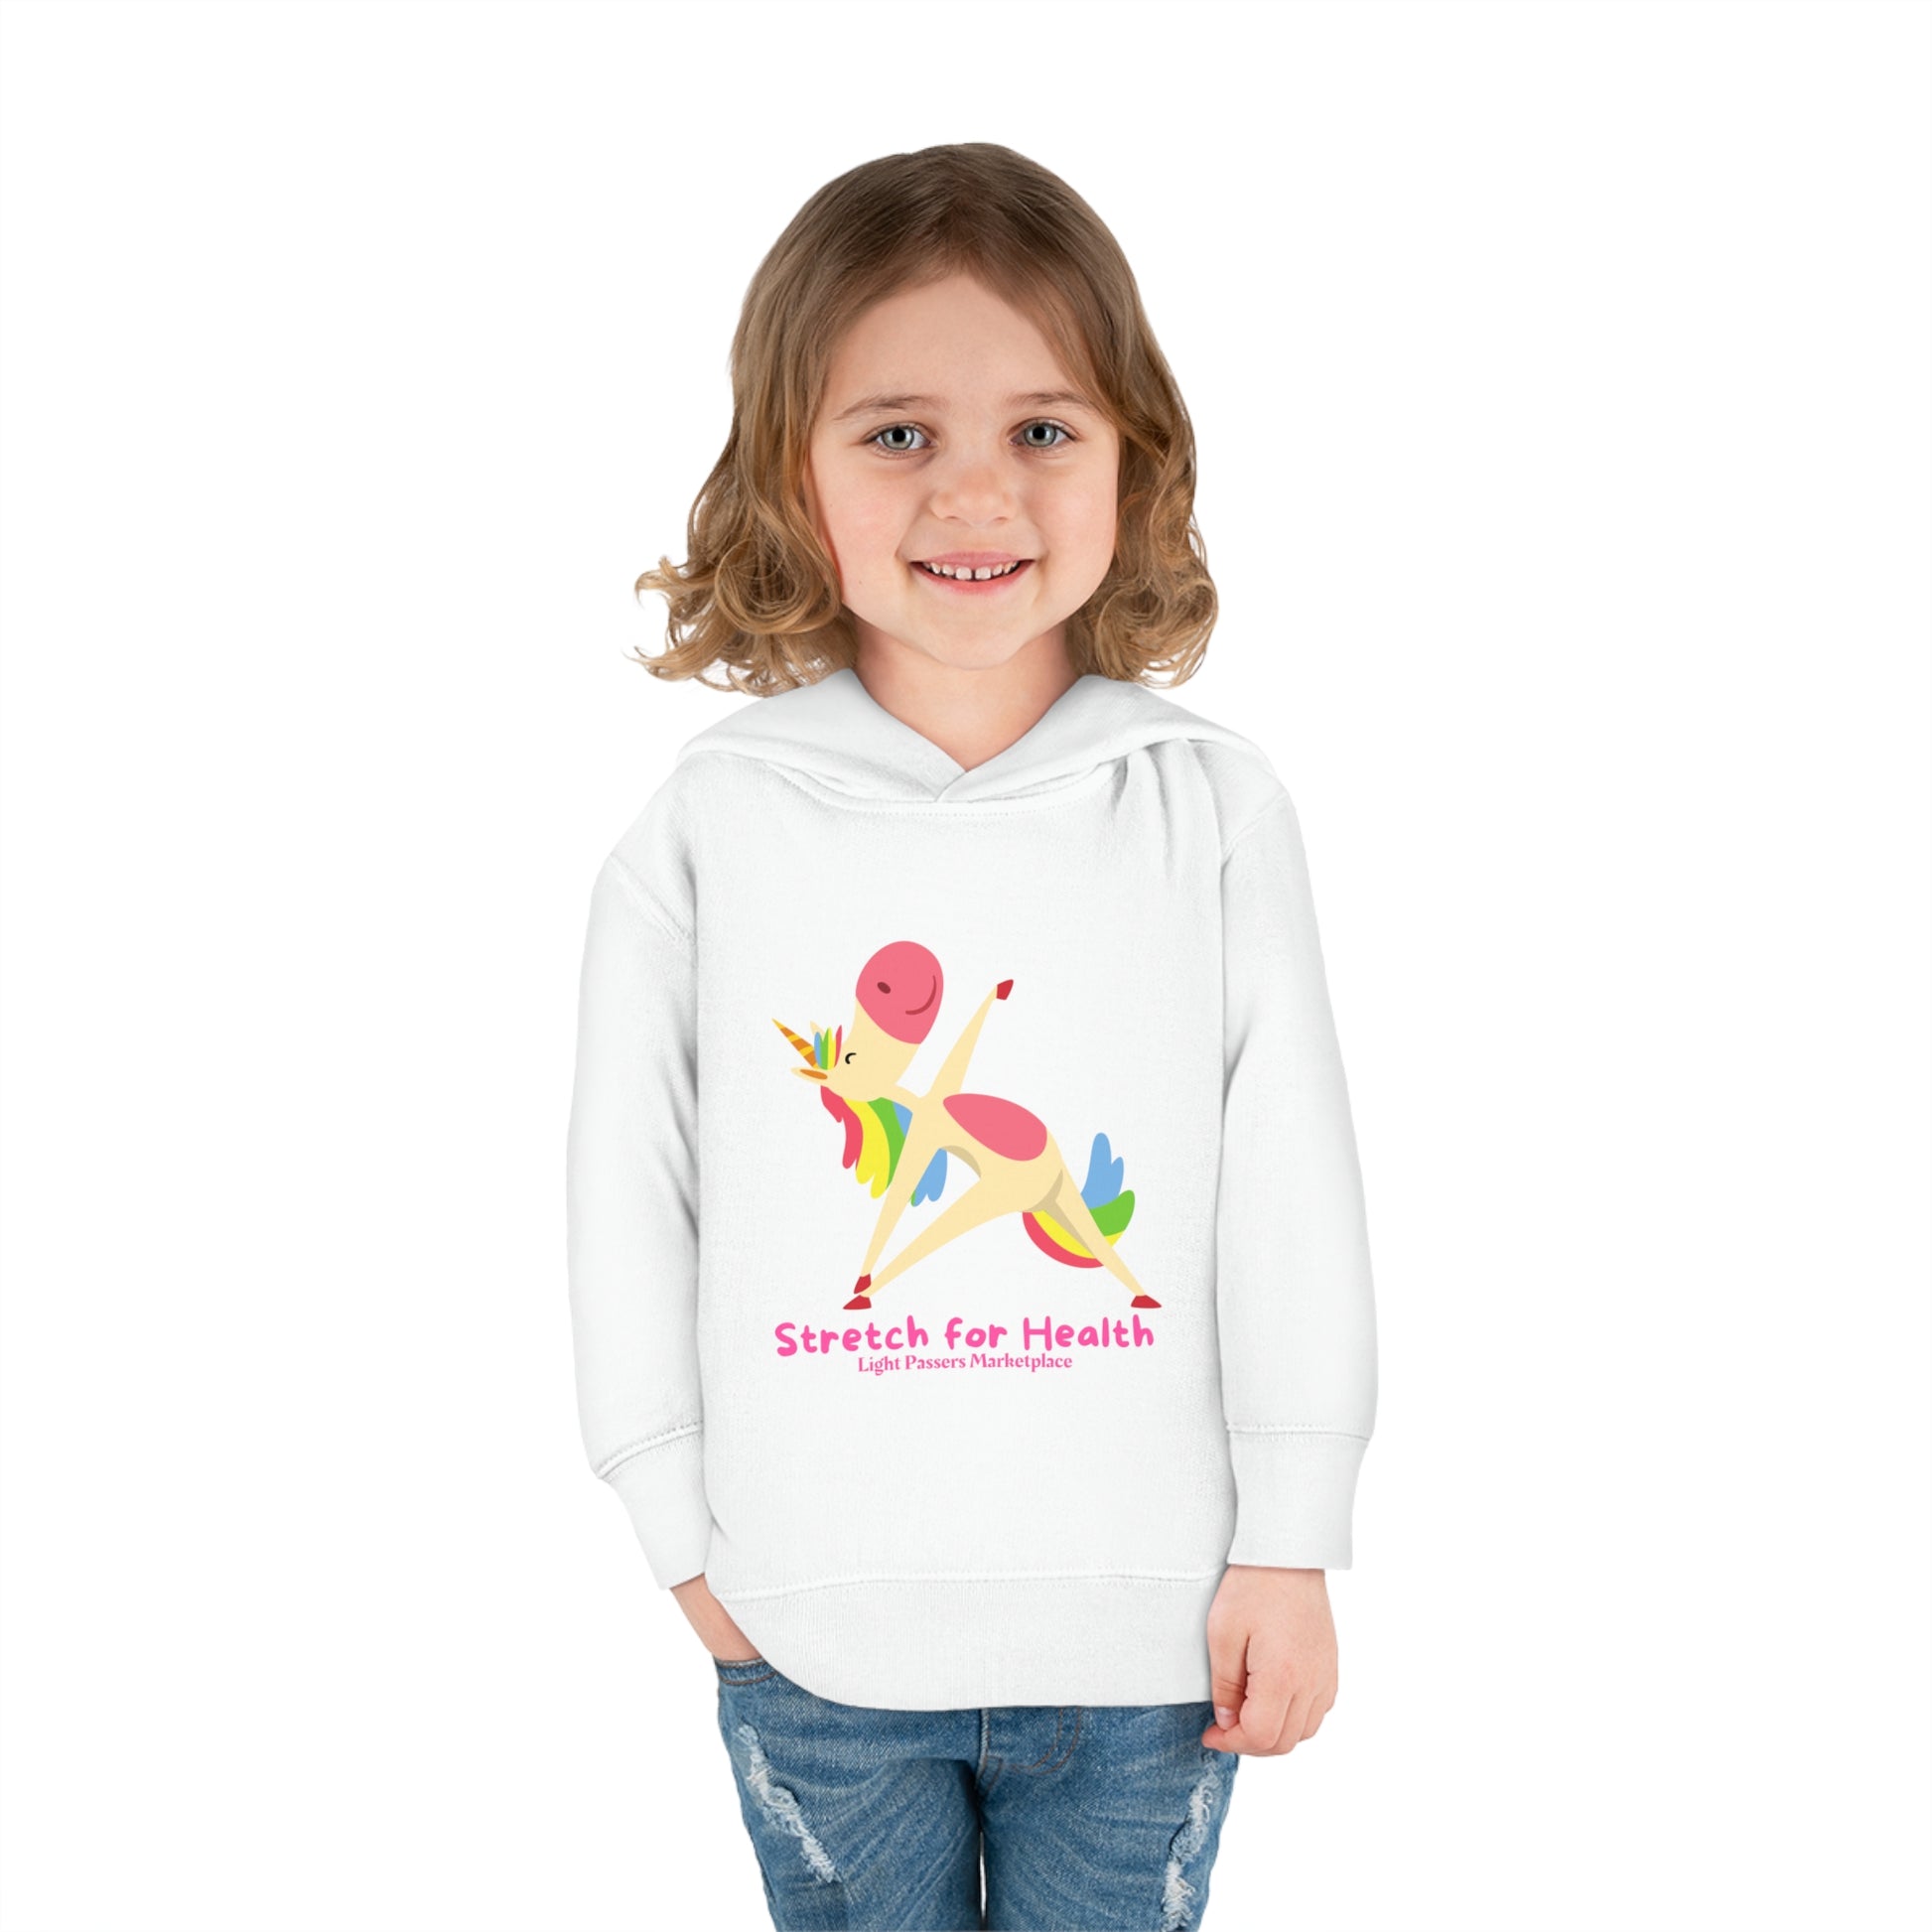 A toddler wearing a white hoodie with a unicorn design, featuring jersey-lined hood, cover-stitched details, and side seam pockets for lasting comfort.